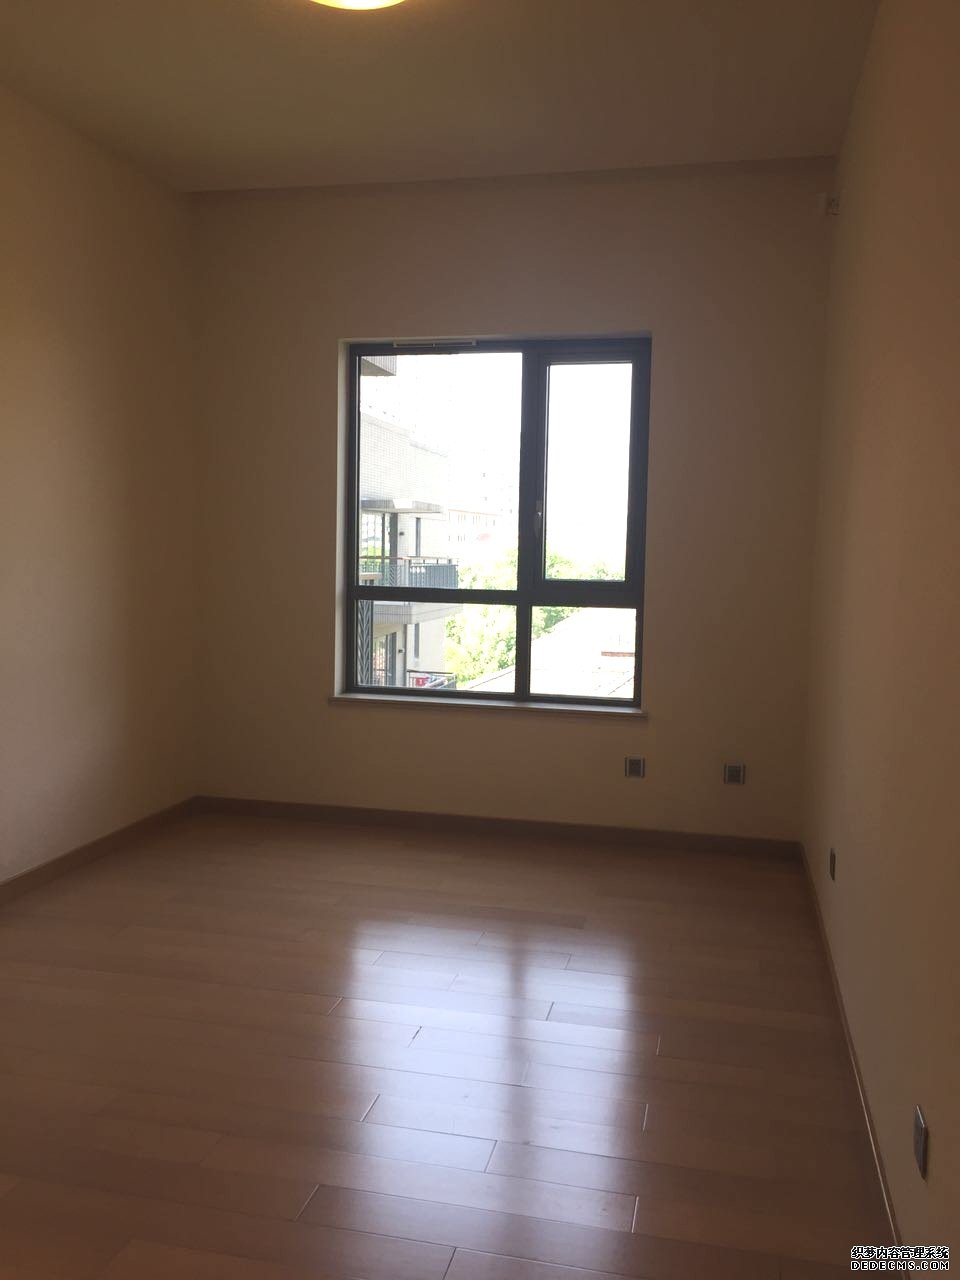  Unfurnished 3BR Apartment in Sinan Mansions